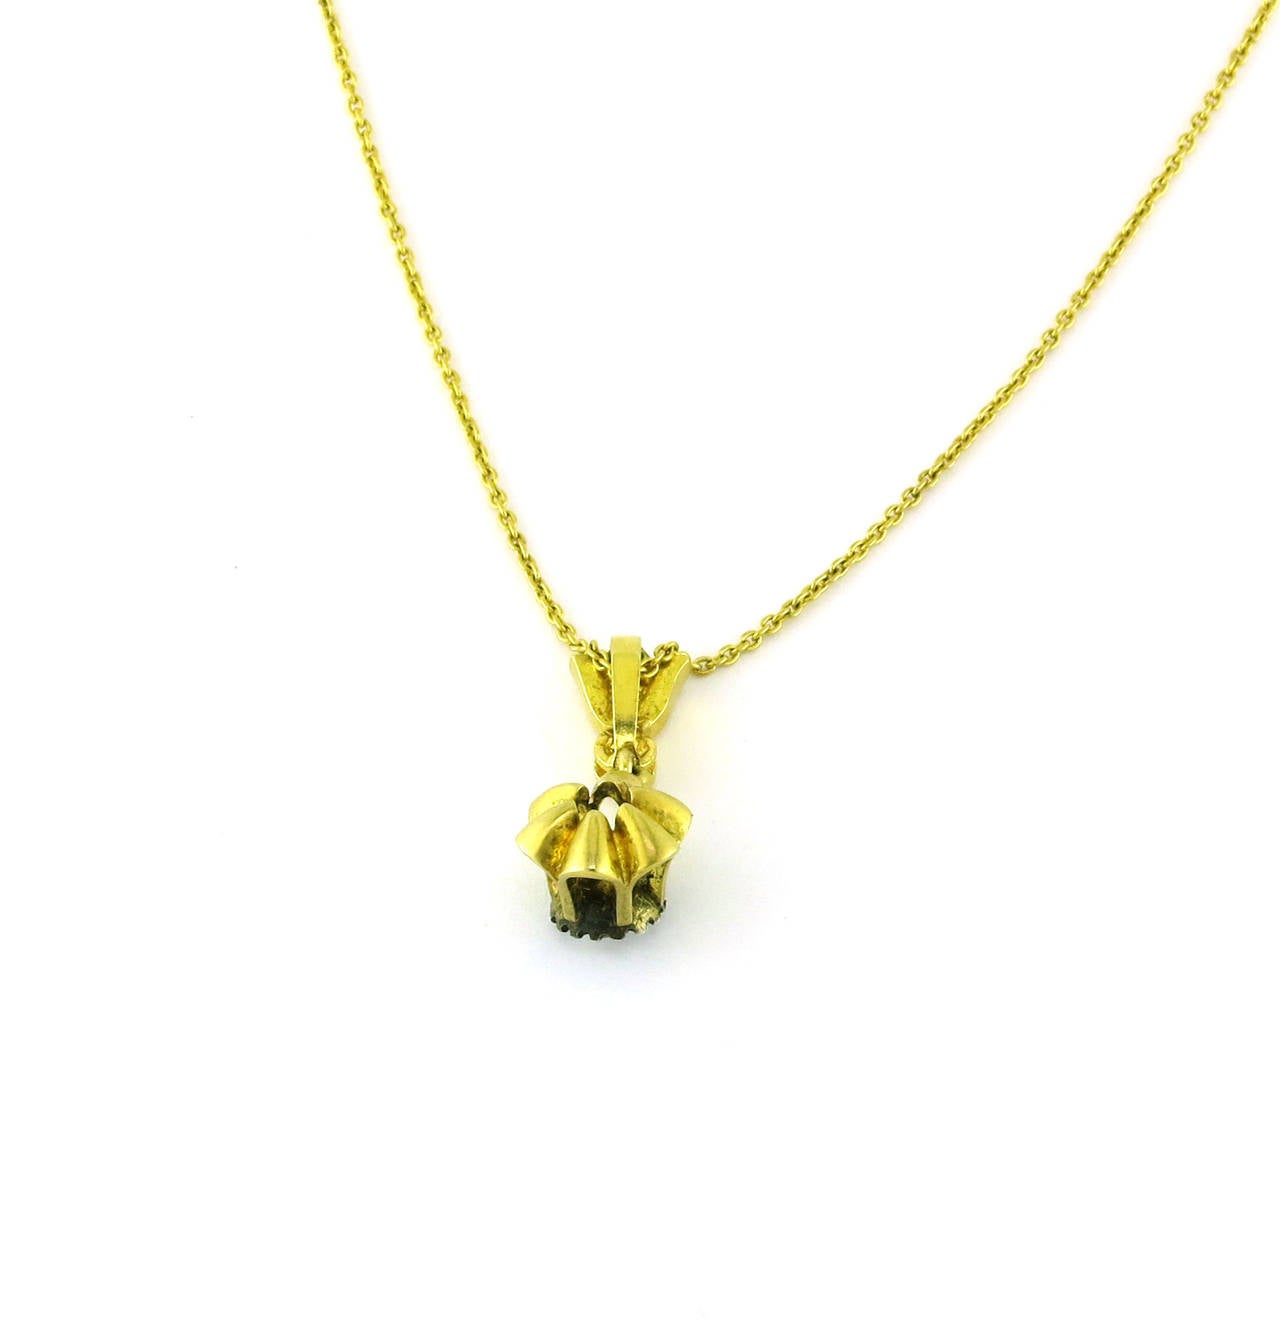 18 Karat Yellow Gold Necklace with a 0.20 CT Rose Cut Center Diamond, accented with an Antique Silver Patina Finish. 

Inspired by the Edwardian Era, a time when fine jewelry was a crucial component of every outfit, pieces were created to